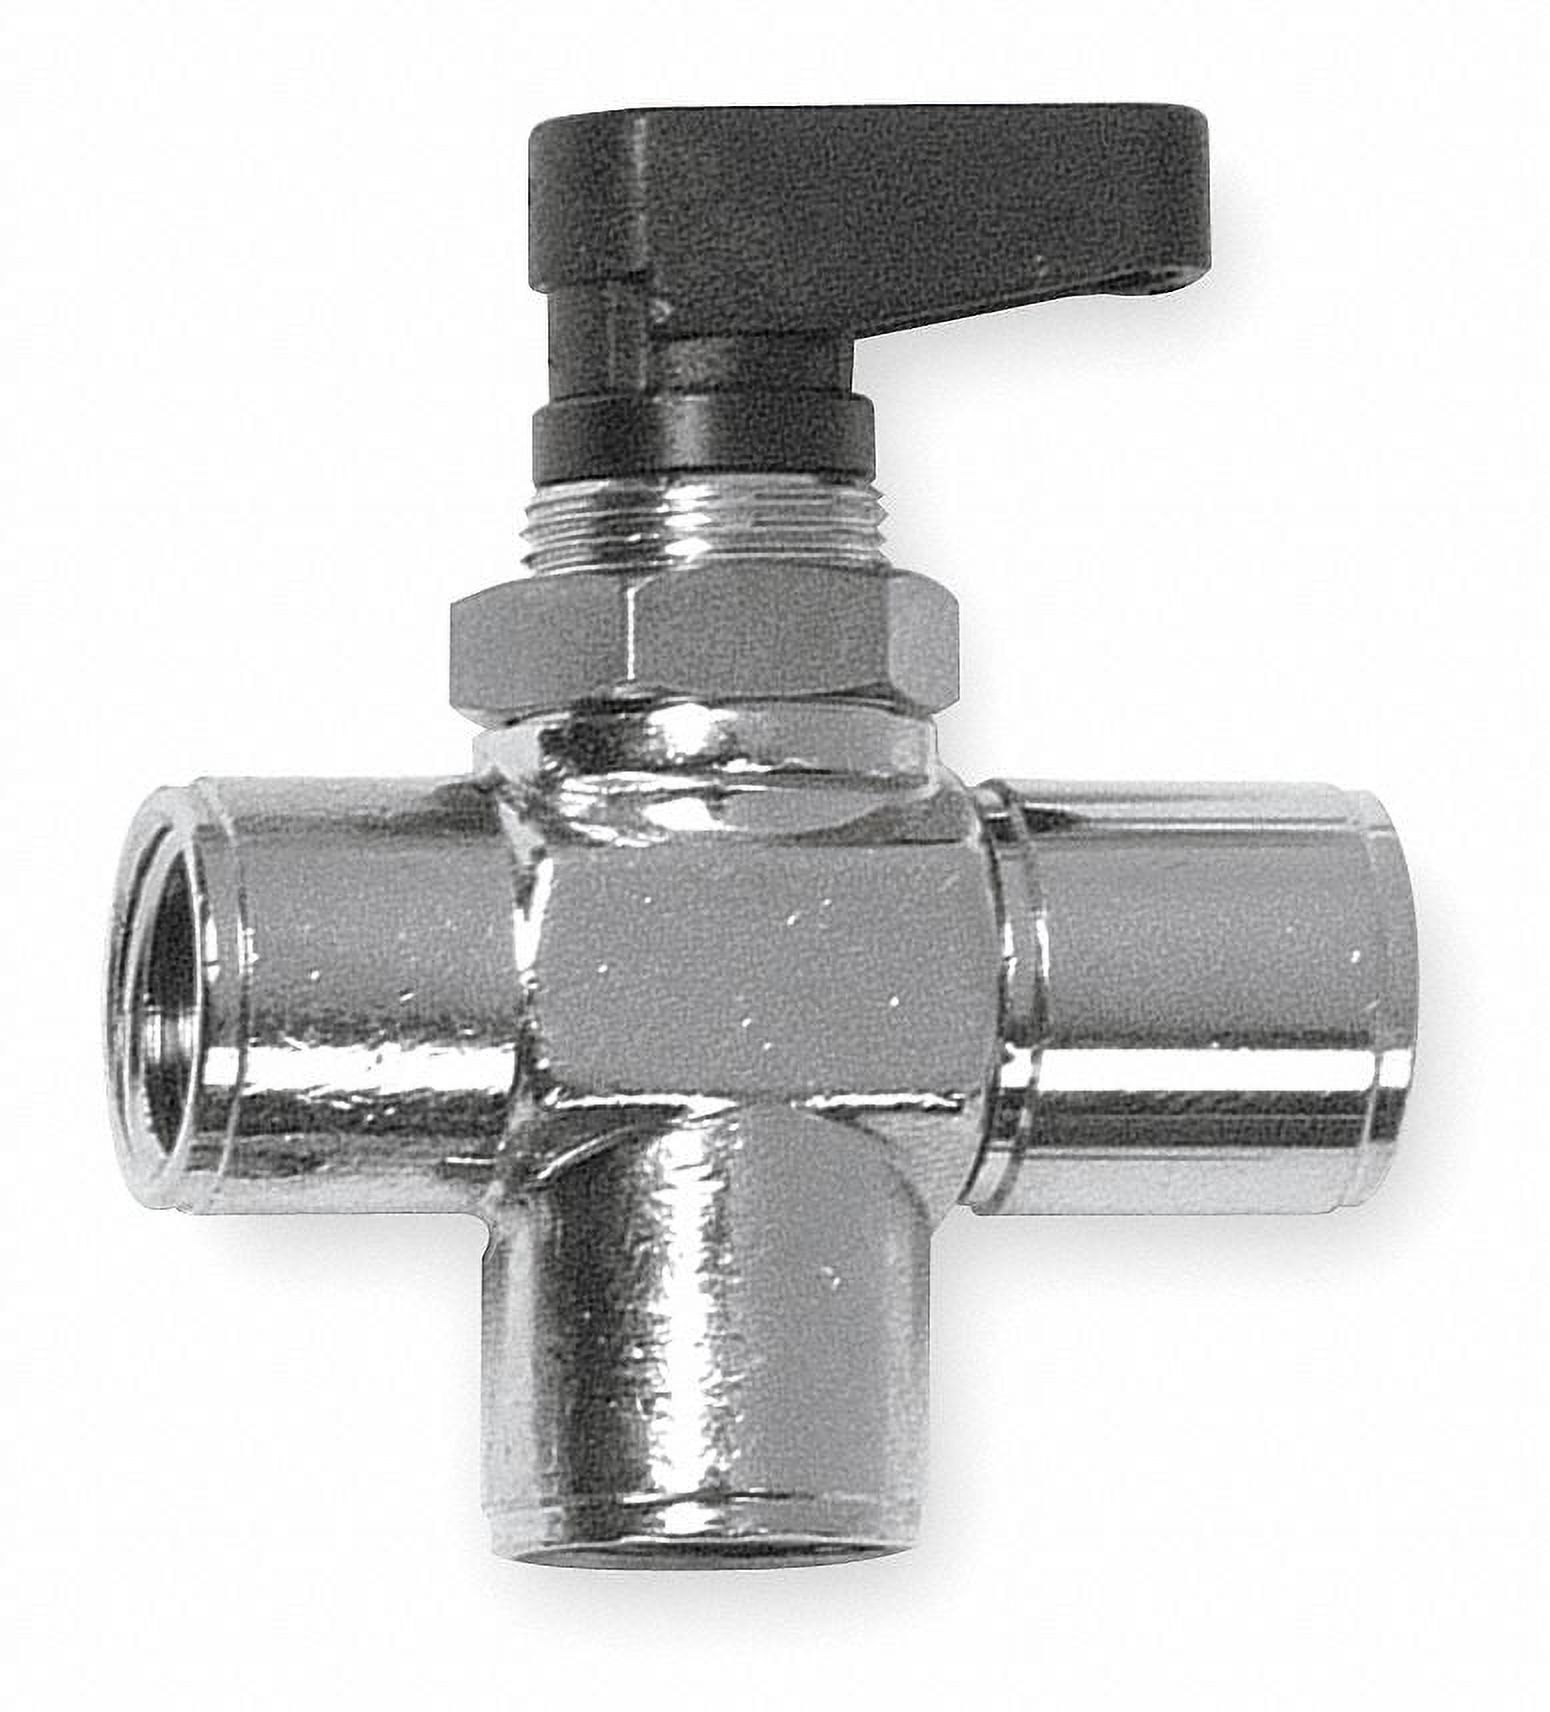 Aignep Usa Brass Mini Ball Valve,3-Way,FNPT,1/8 in  86700-02 - image 1 of 1